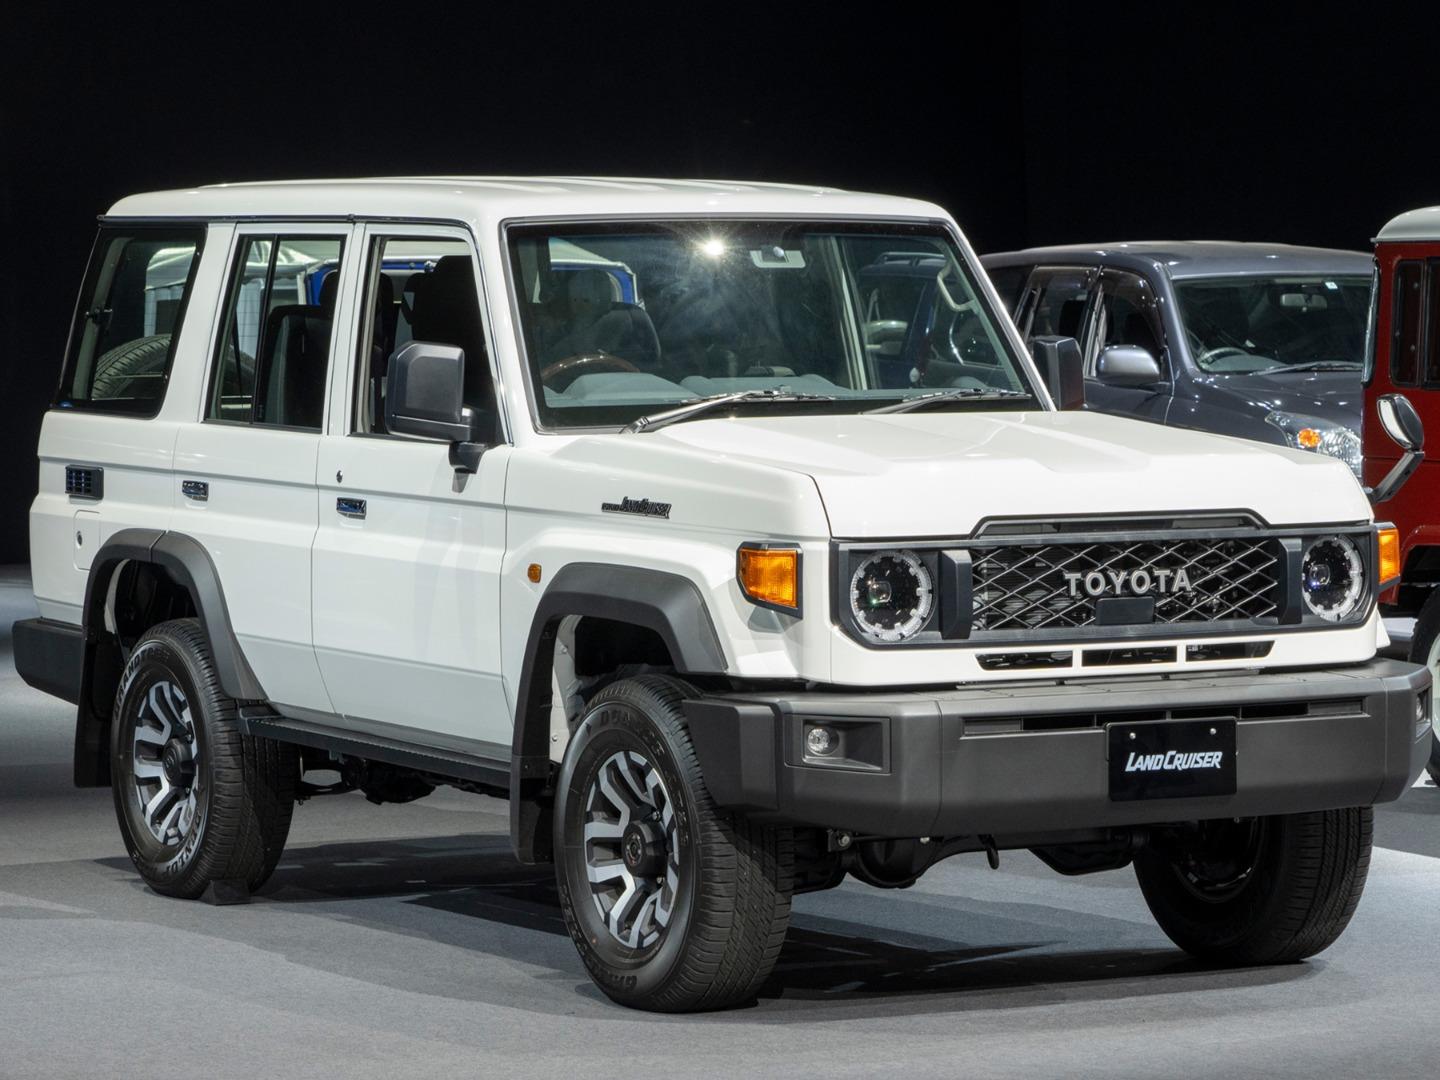 global reveal of the new toyota land cruiser 70 series and 250 series